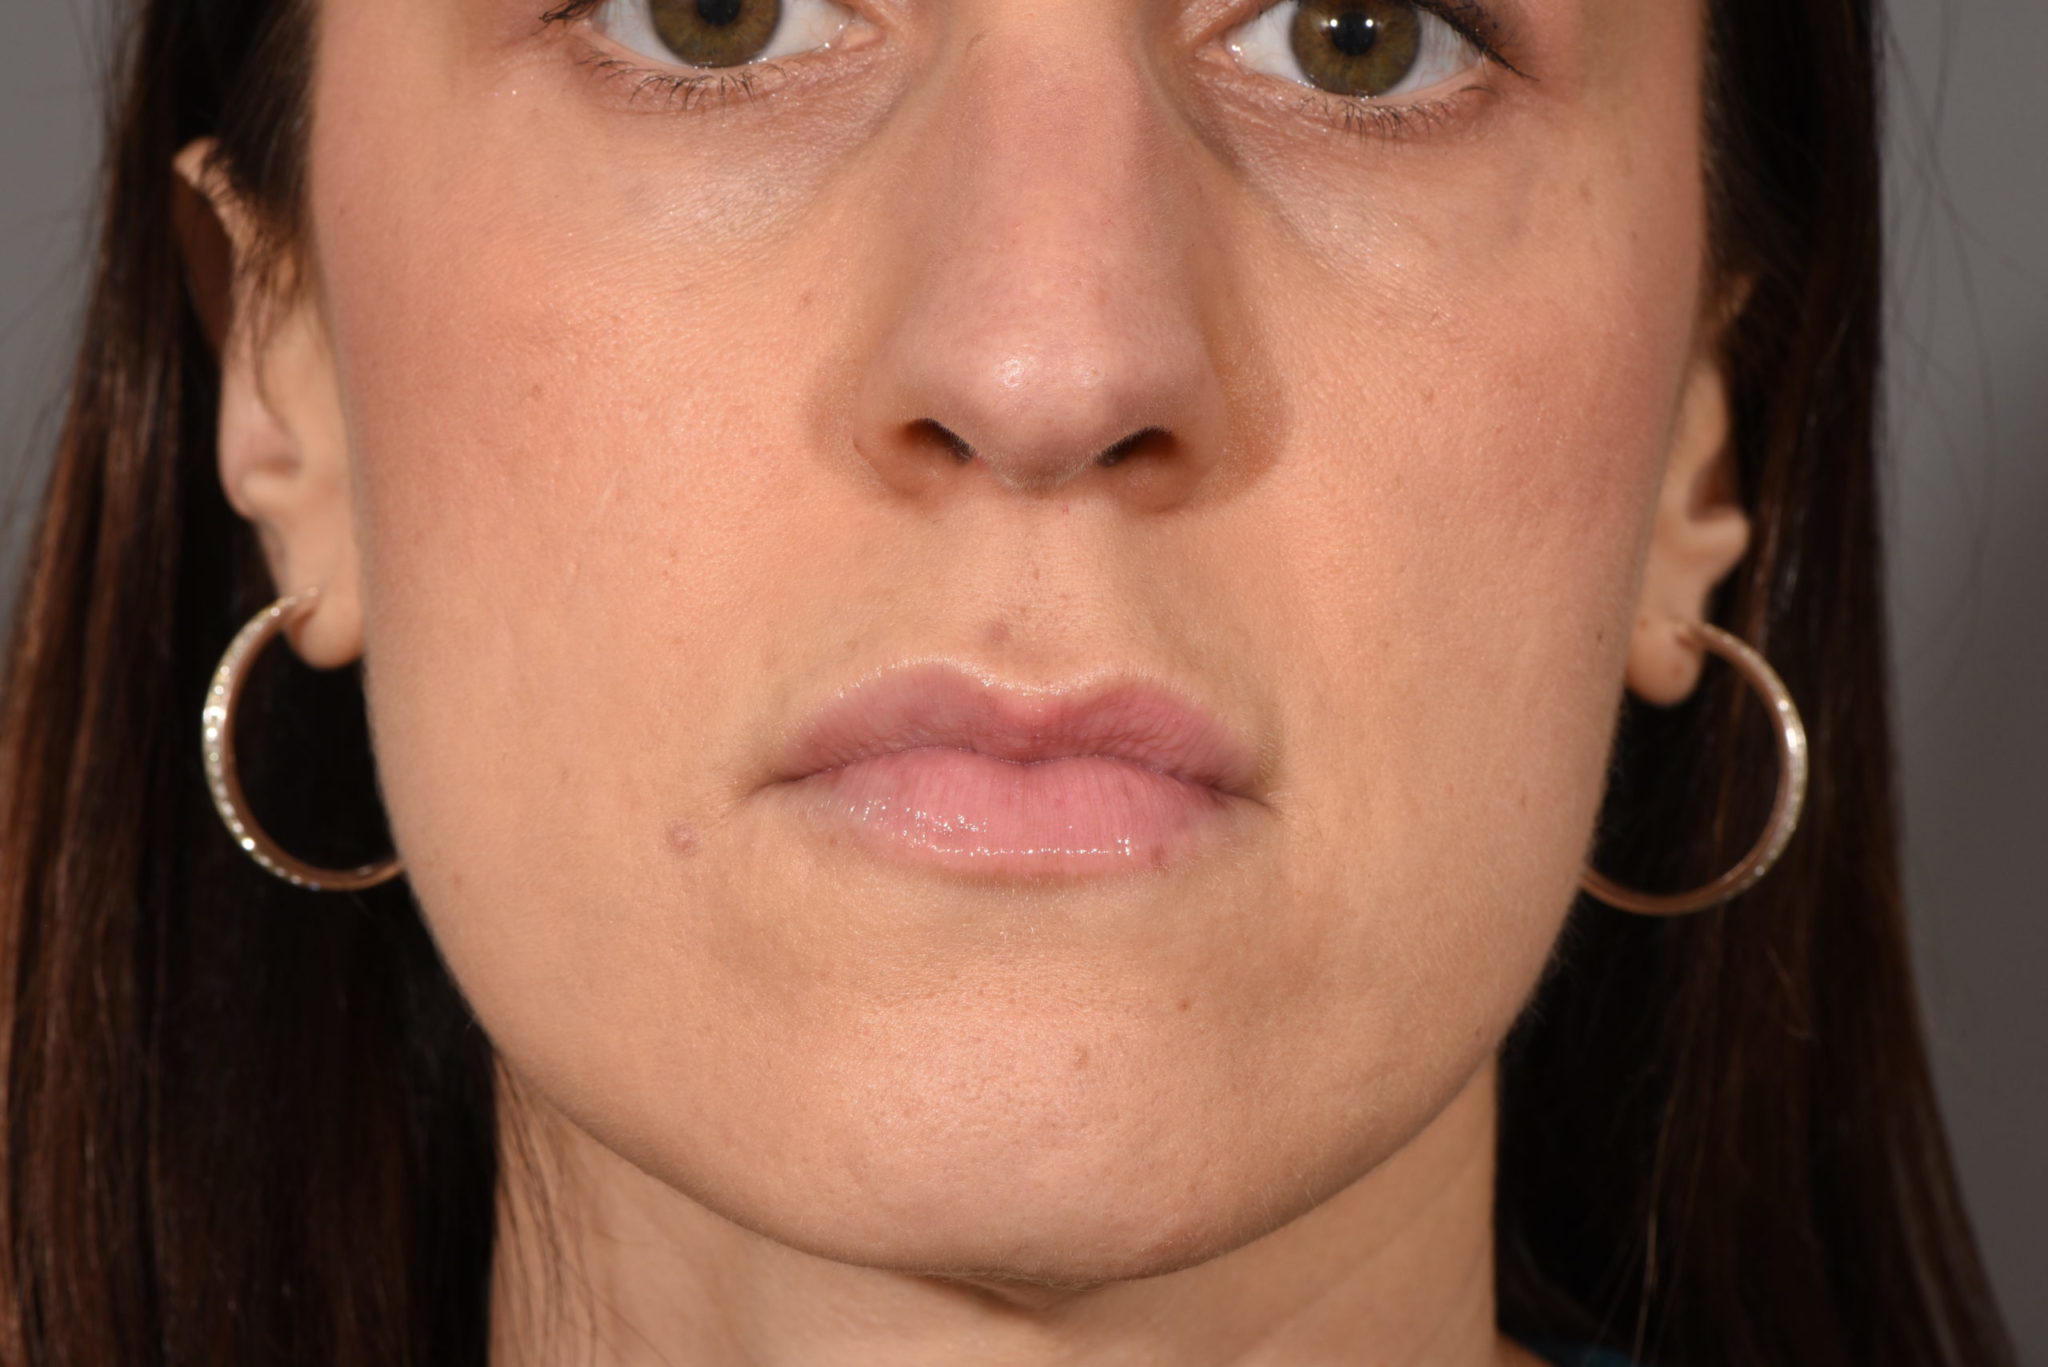 Fillers Patient Photo - Case 5745 - after view-0